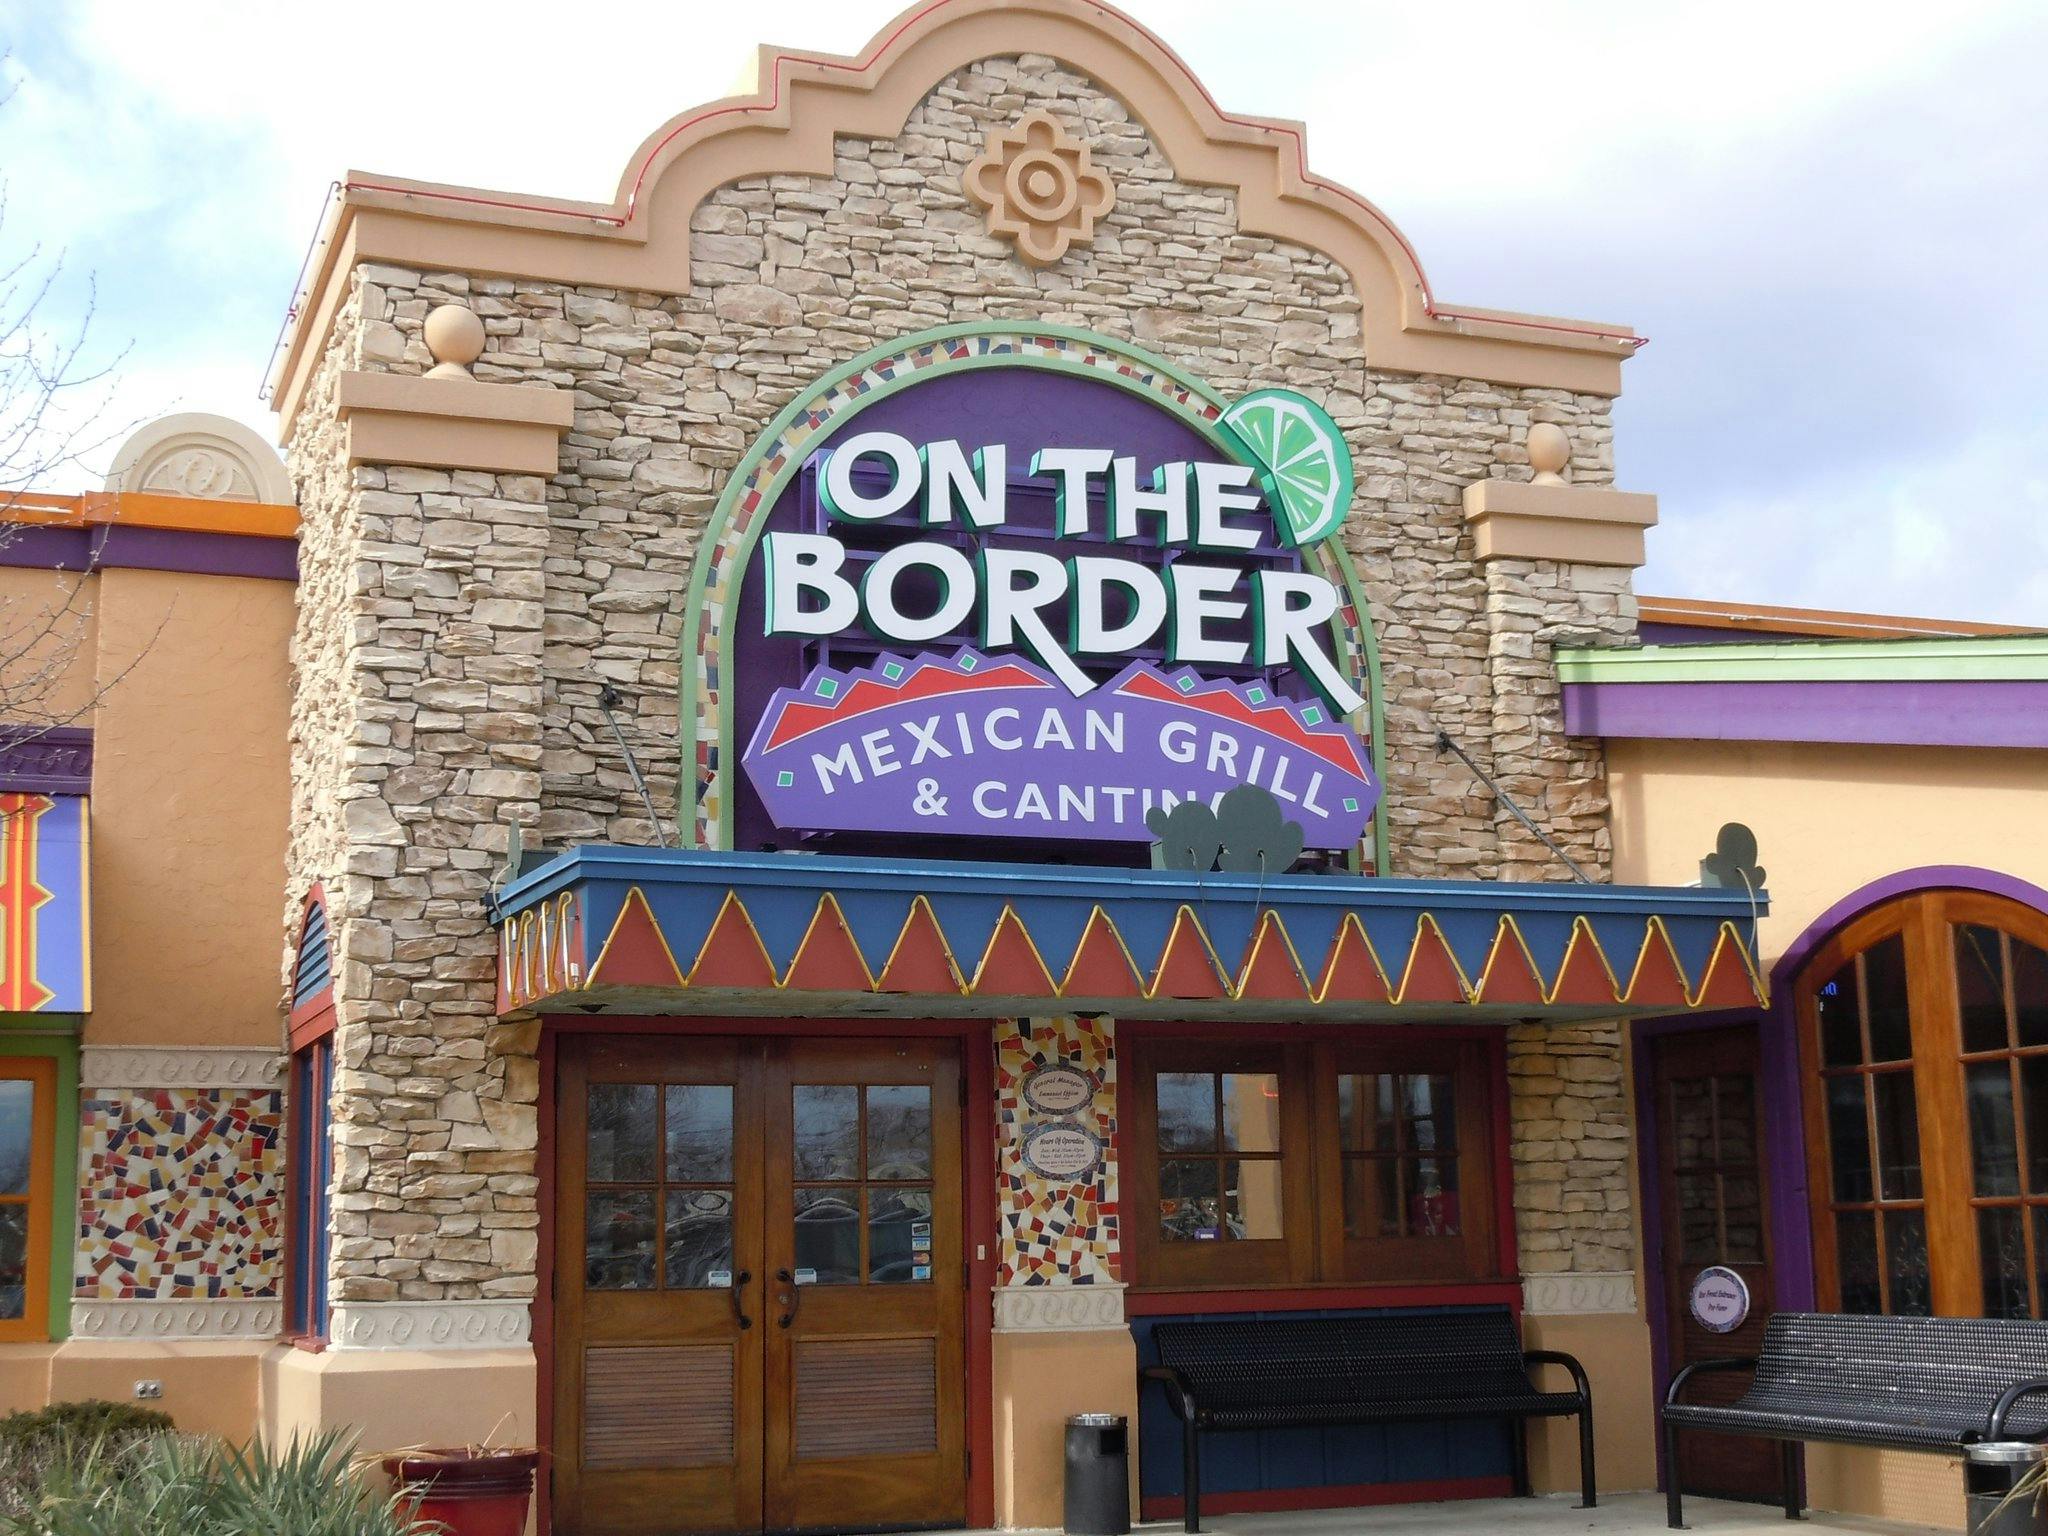 On the Border Mexican Grill and Cantina restaurant